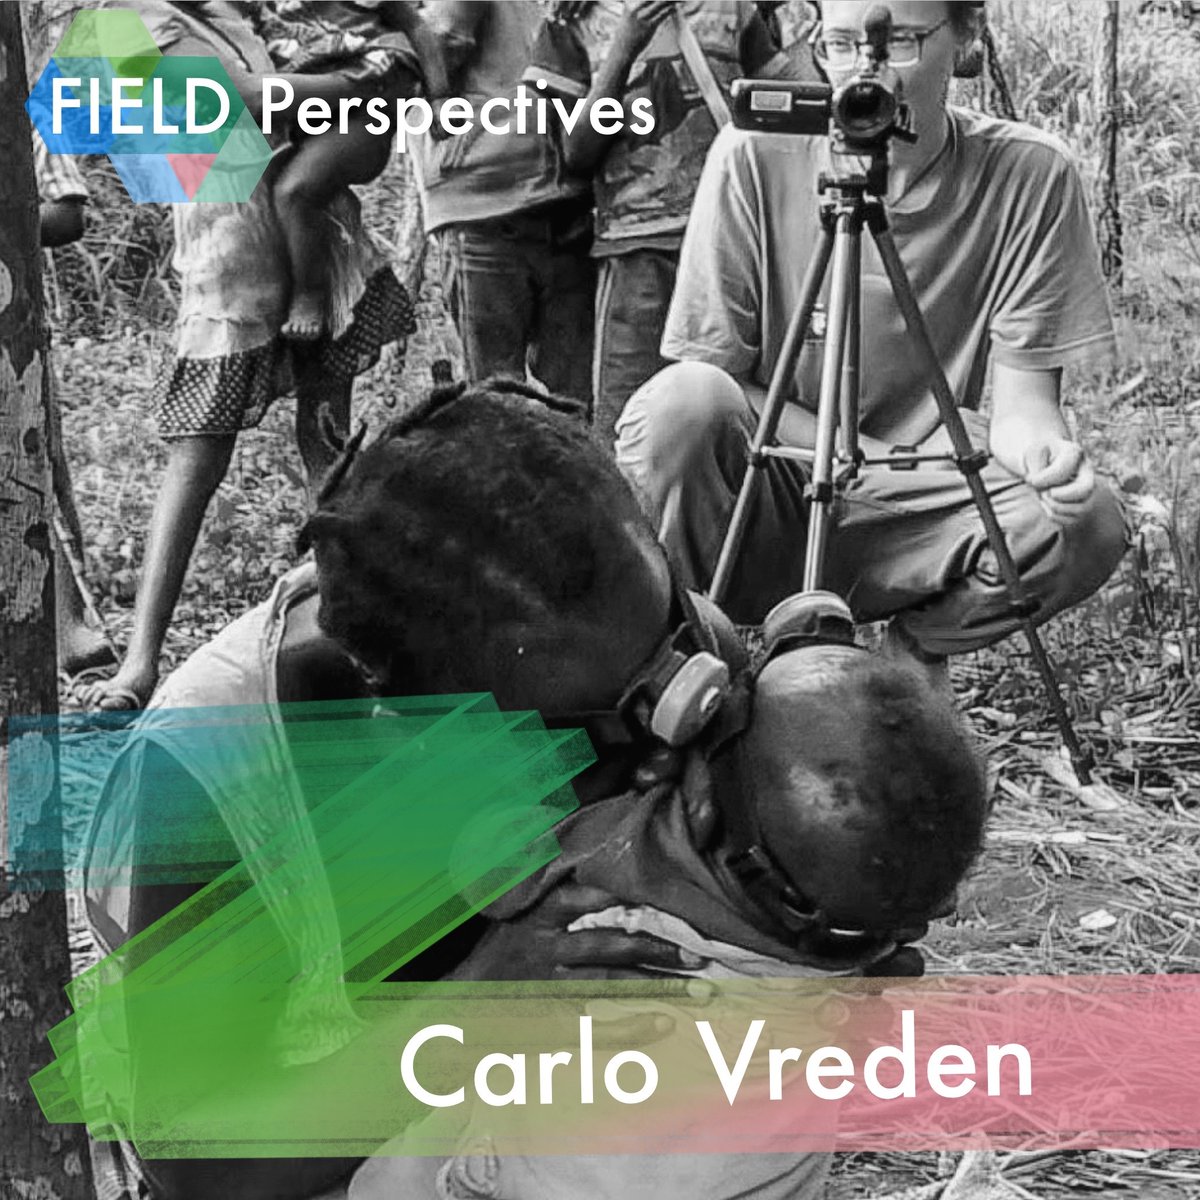 At #FIELD, @carlovreden discusses recontextualising identity with fieldwork 🌈 'While being forcibly closeted in the field will never be risk-free, there are still measures put in place to keep me, and also other researchers on the project, safe.' fieldperspectives.org/CarloVreden.ht…